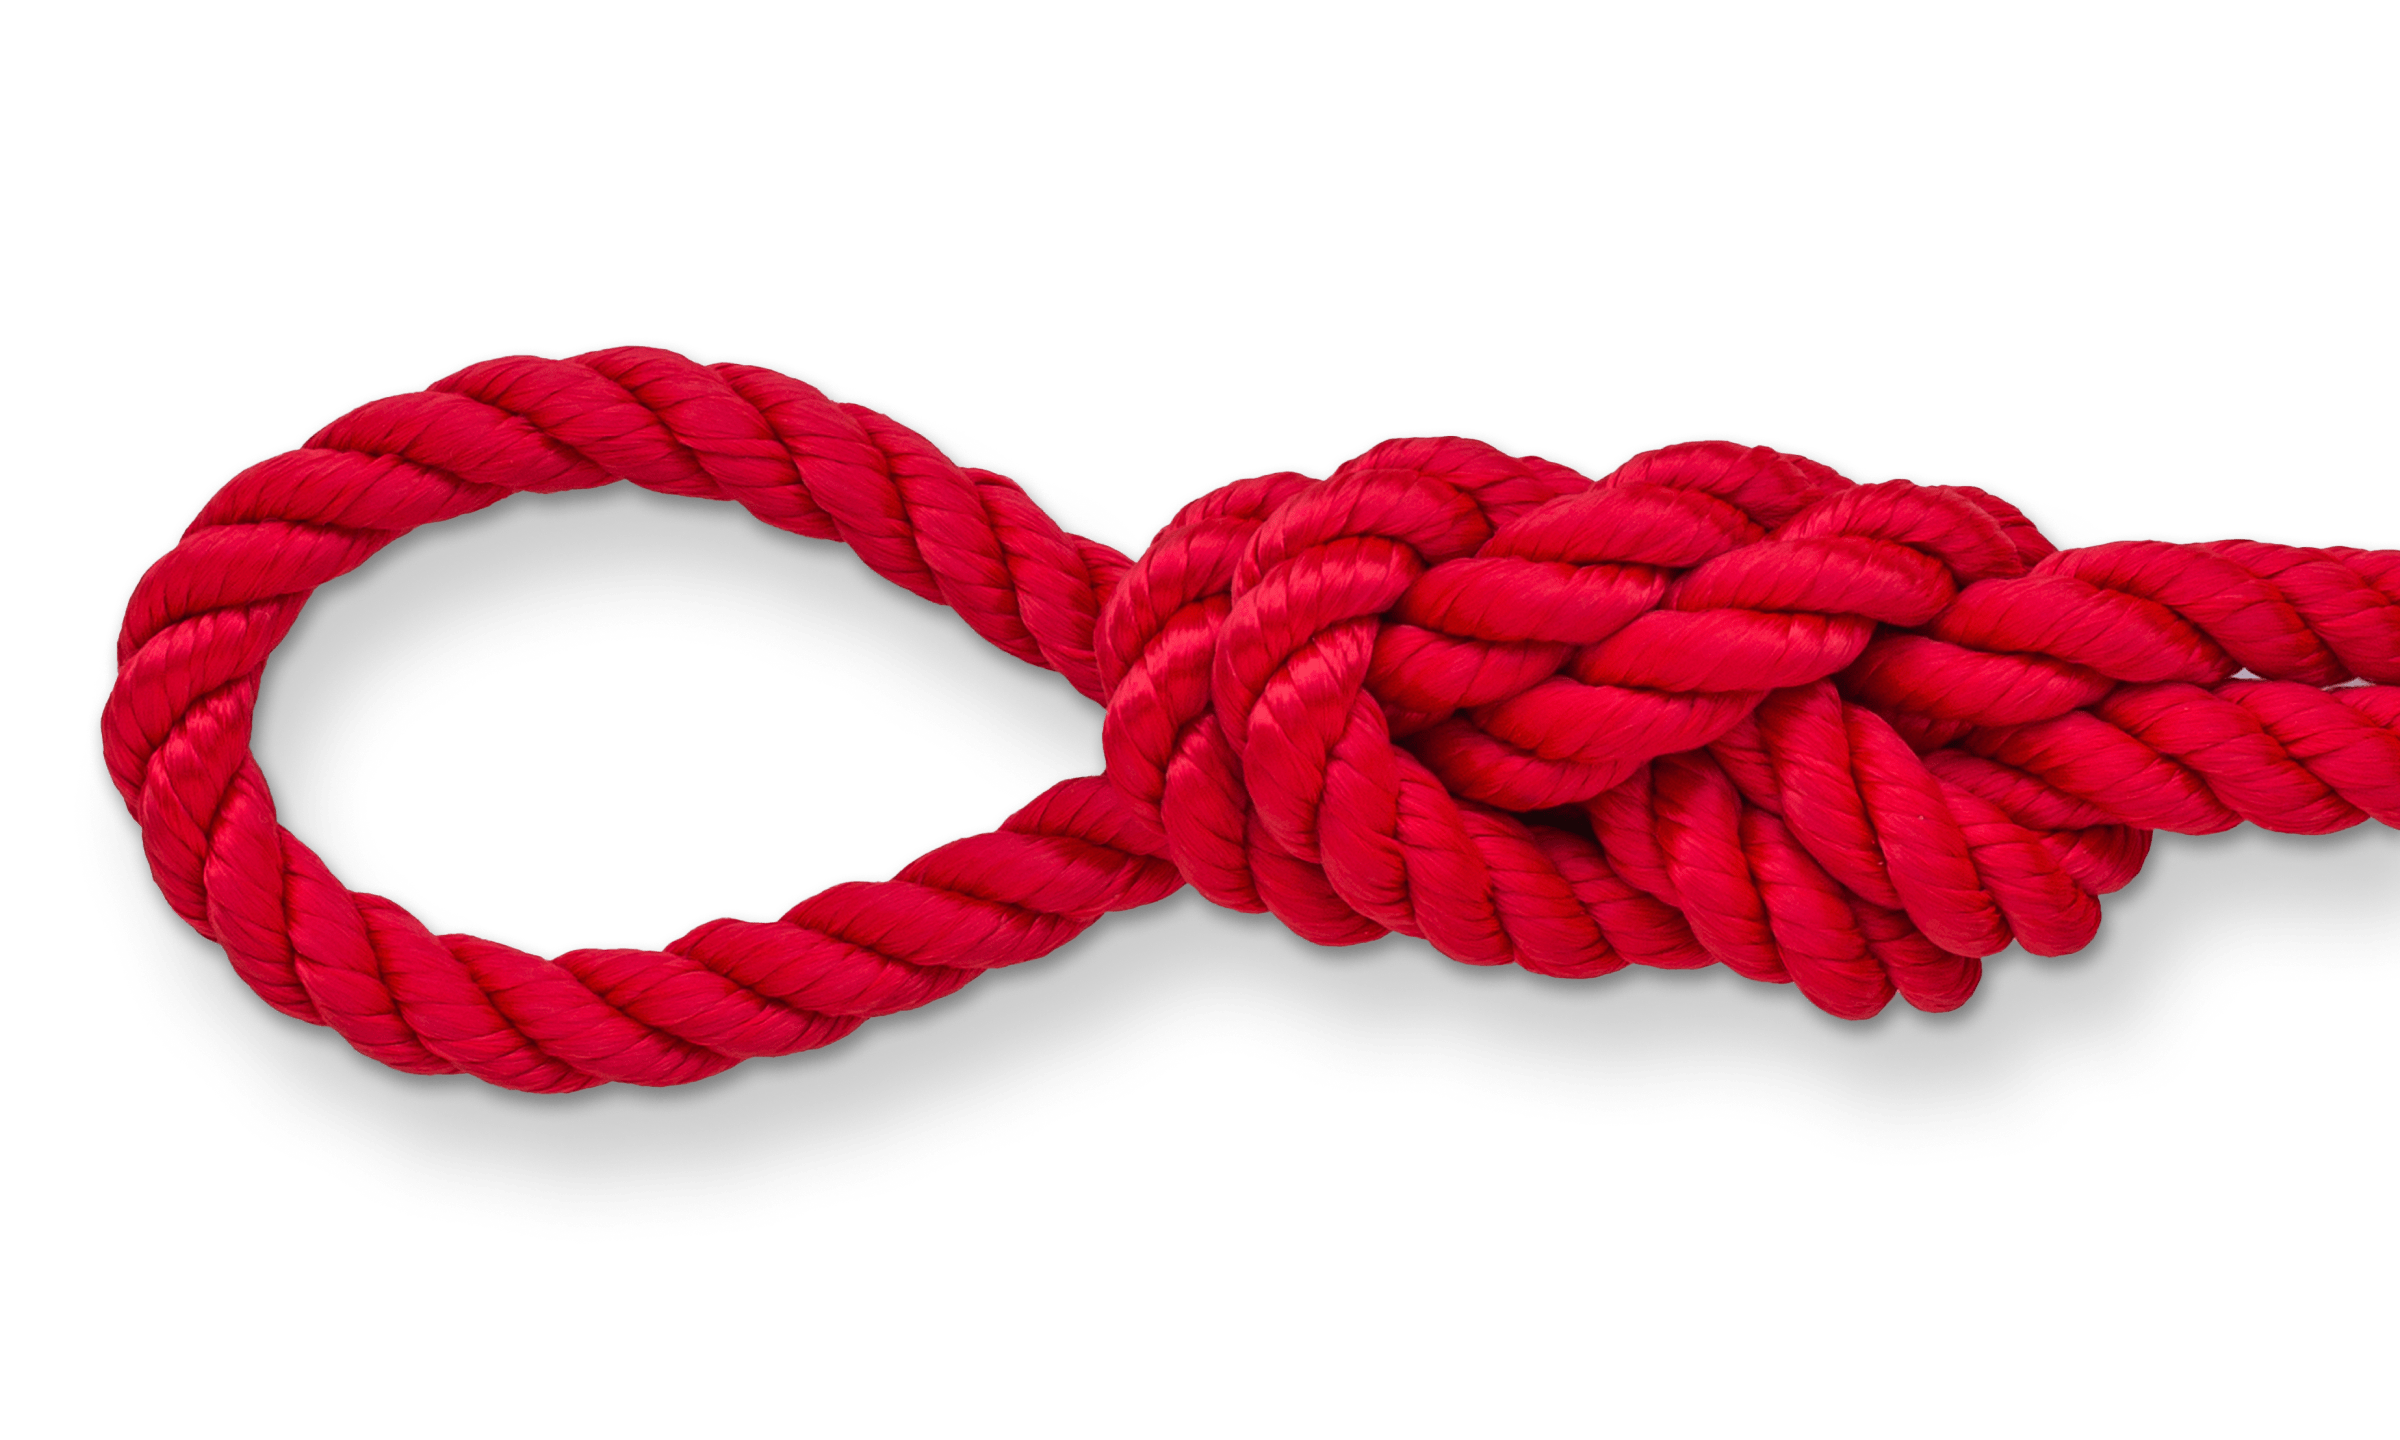 3-strand twisted red rope